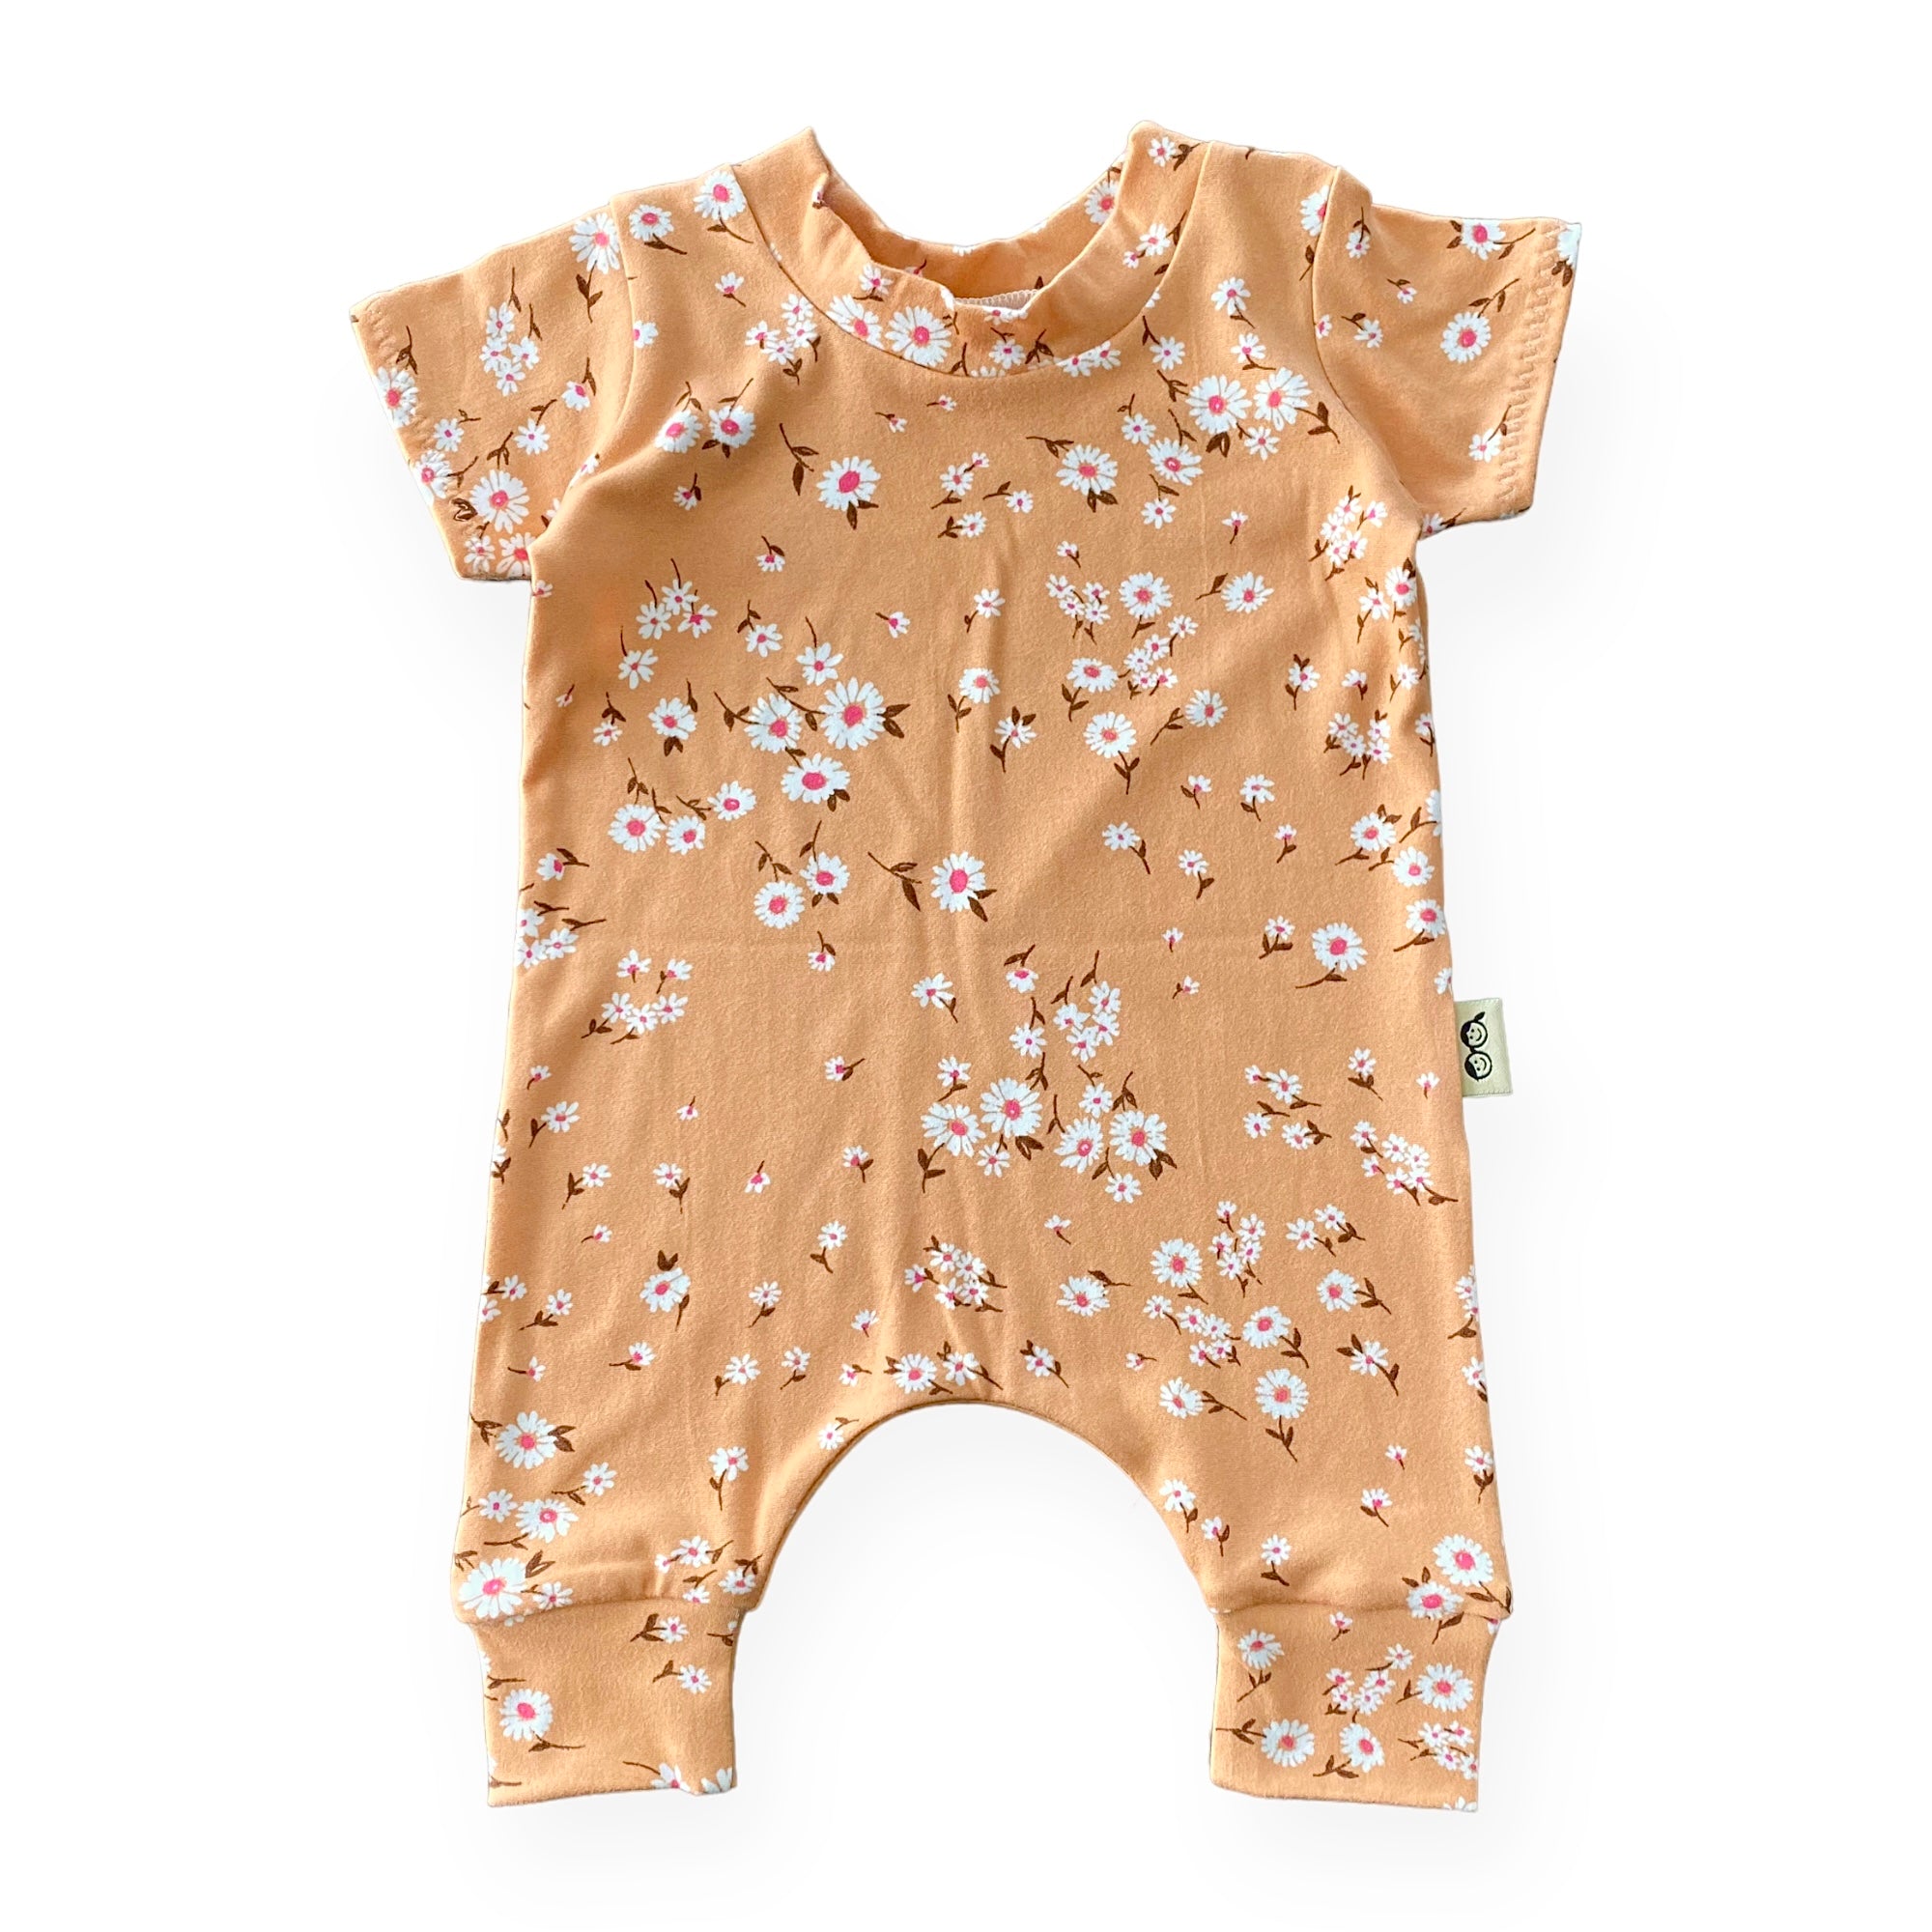 Field of Daisies on Came Harem Romper